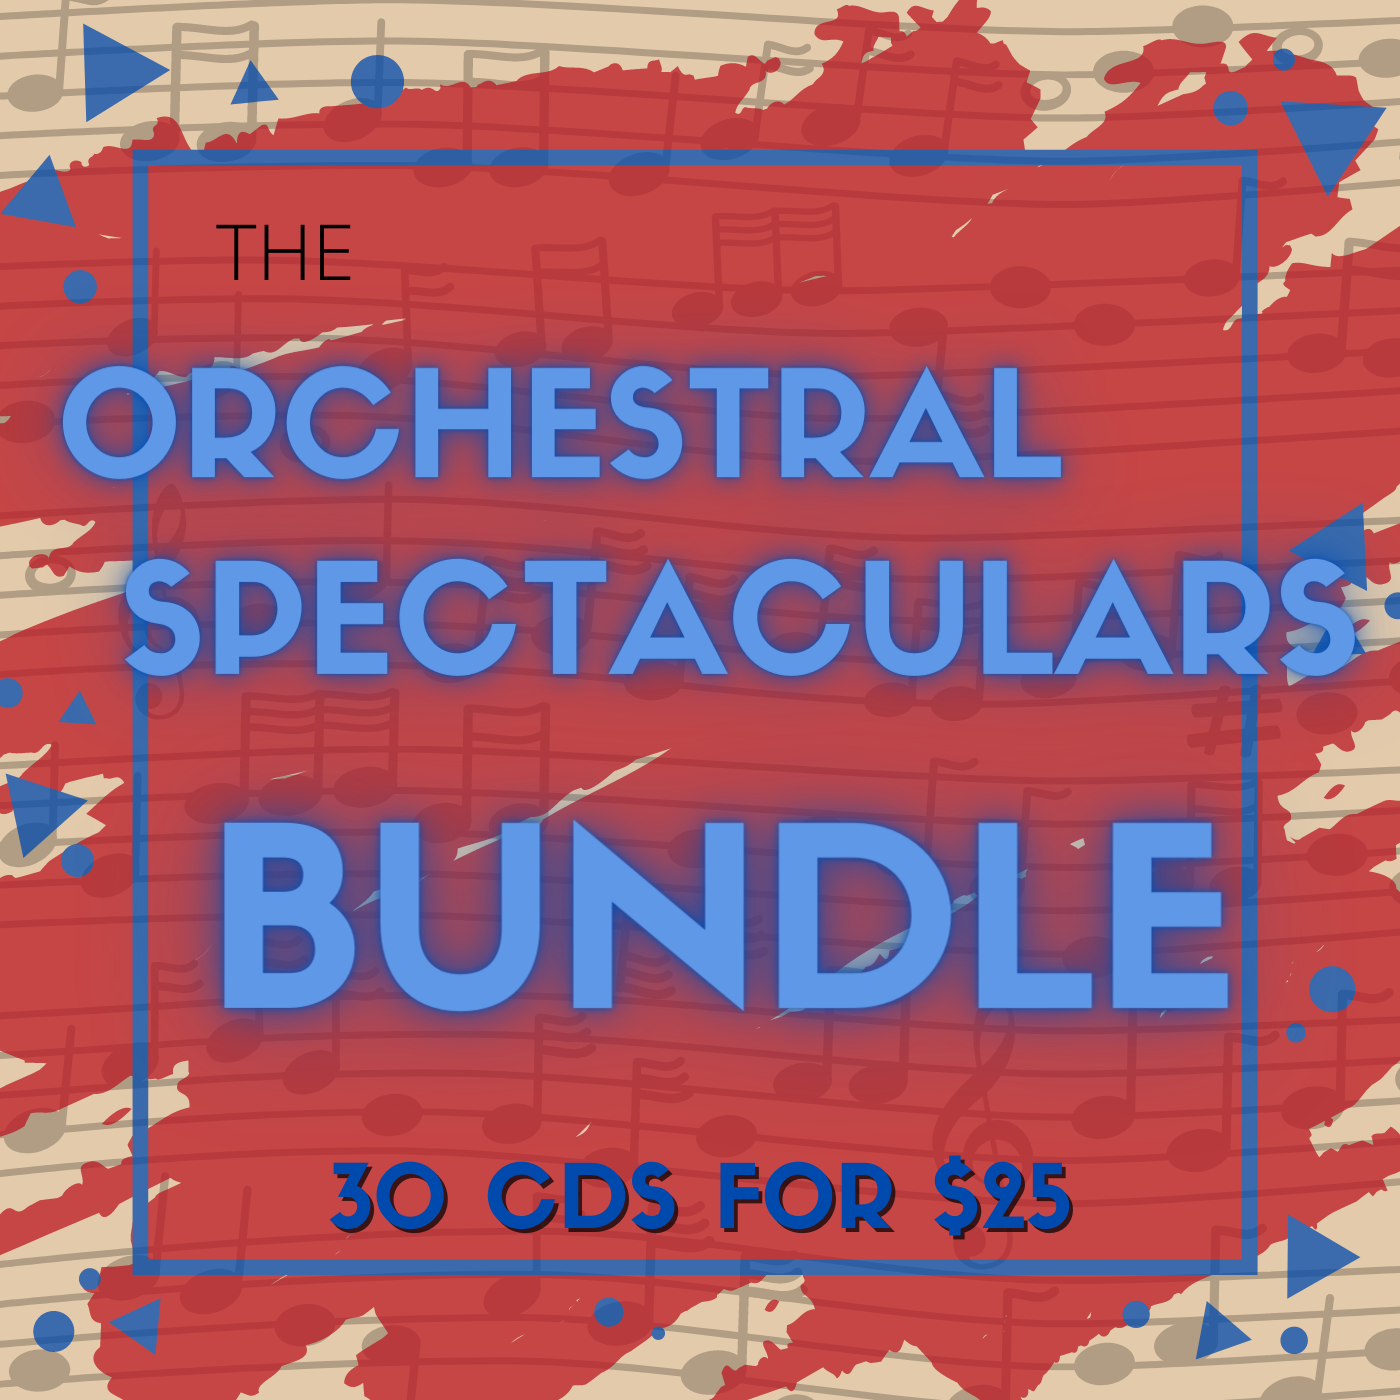 THE ORCHESTRAL SPECTACULARS BUNDLE (30 CDS FOR $25)